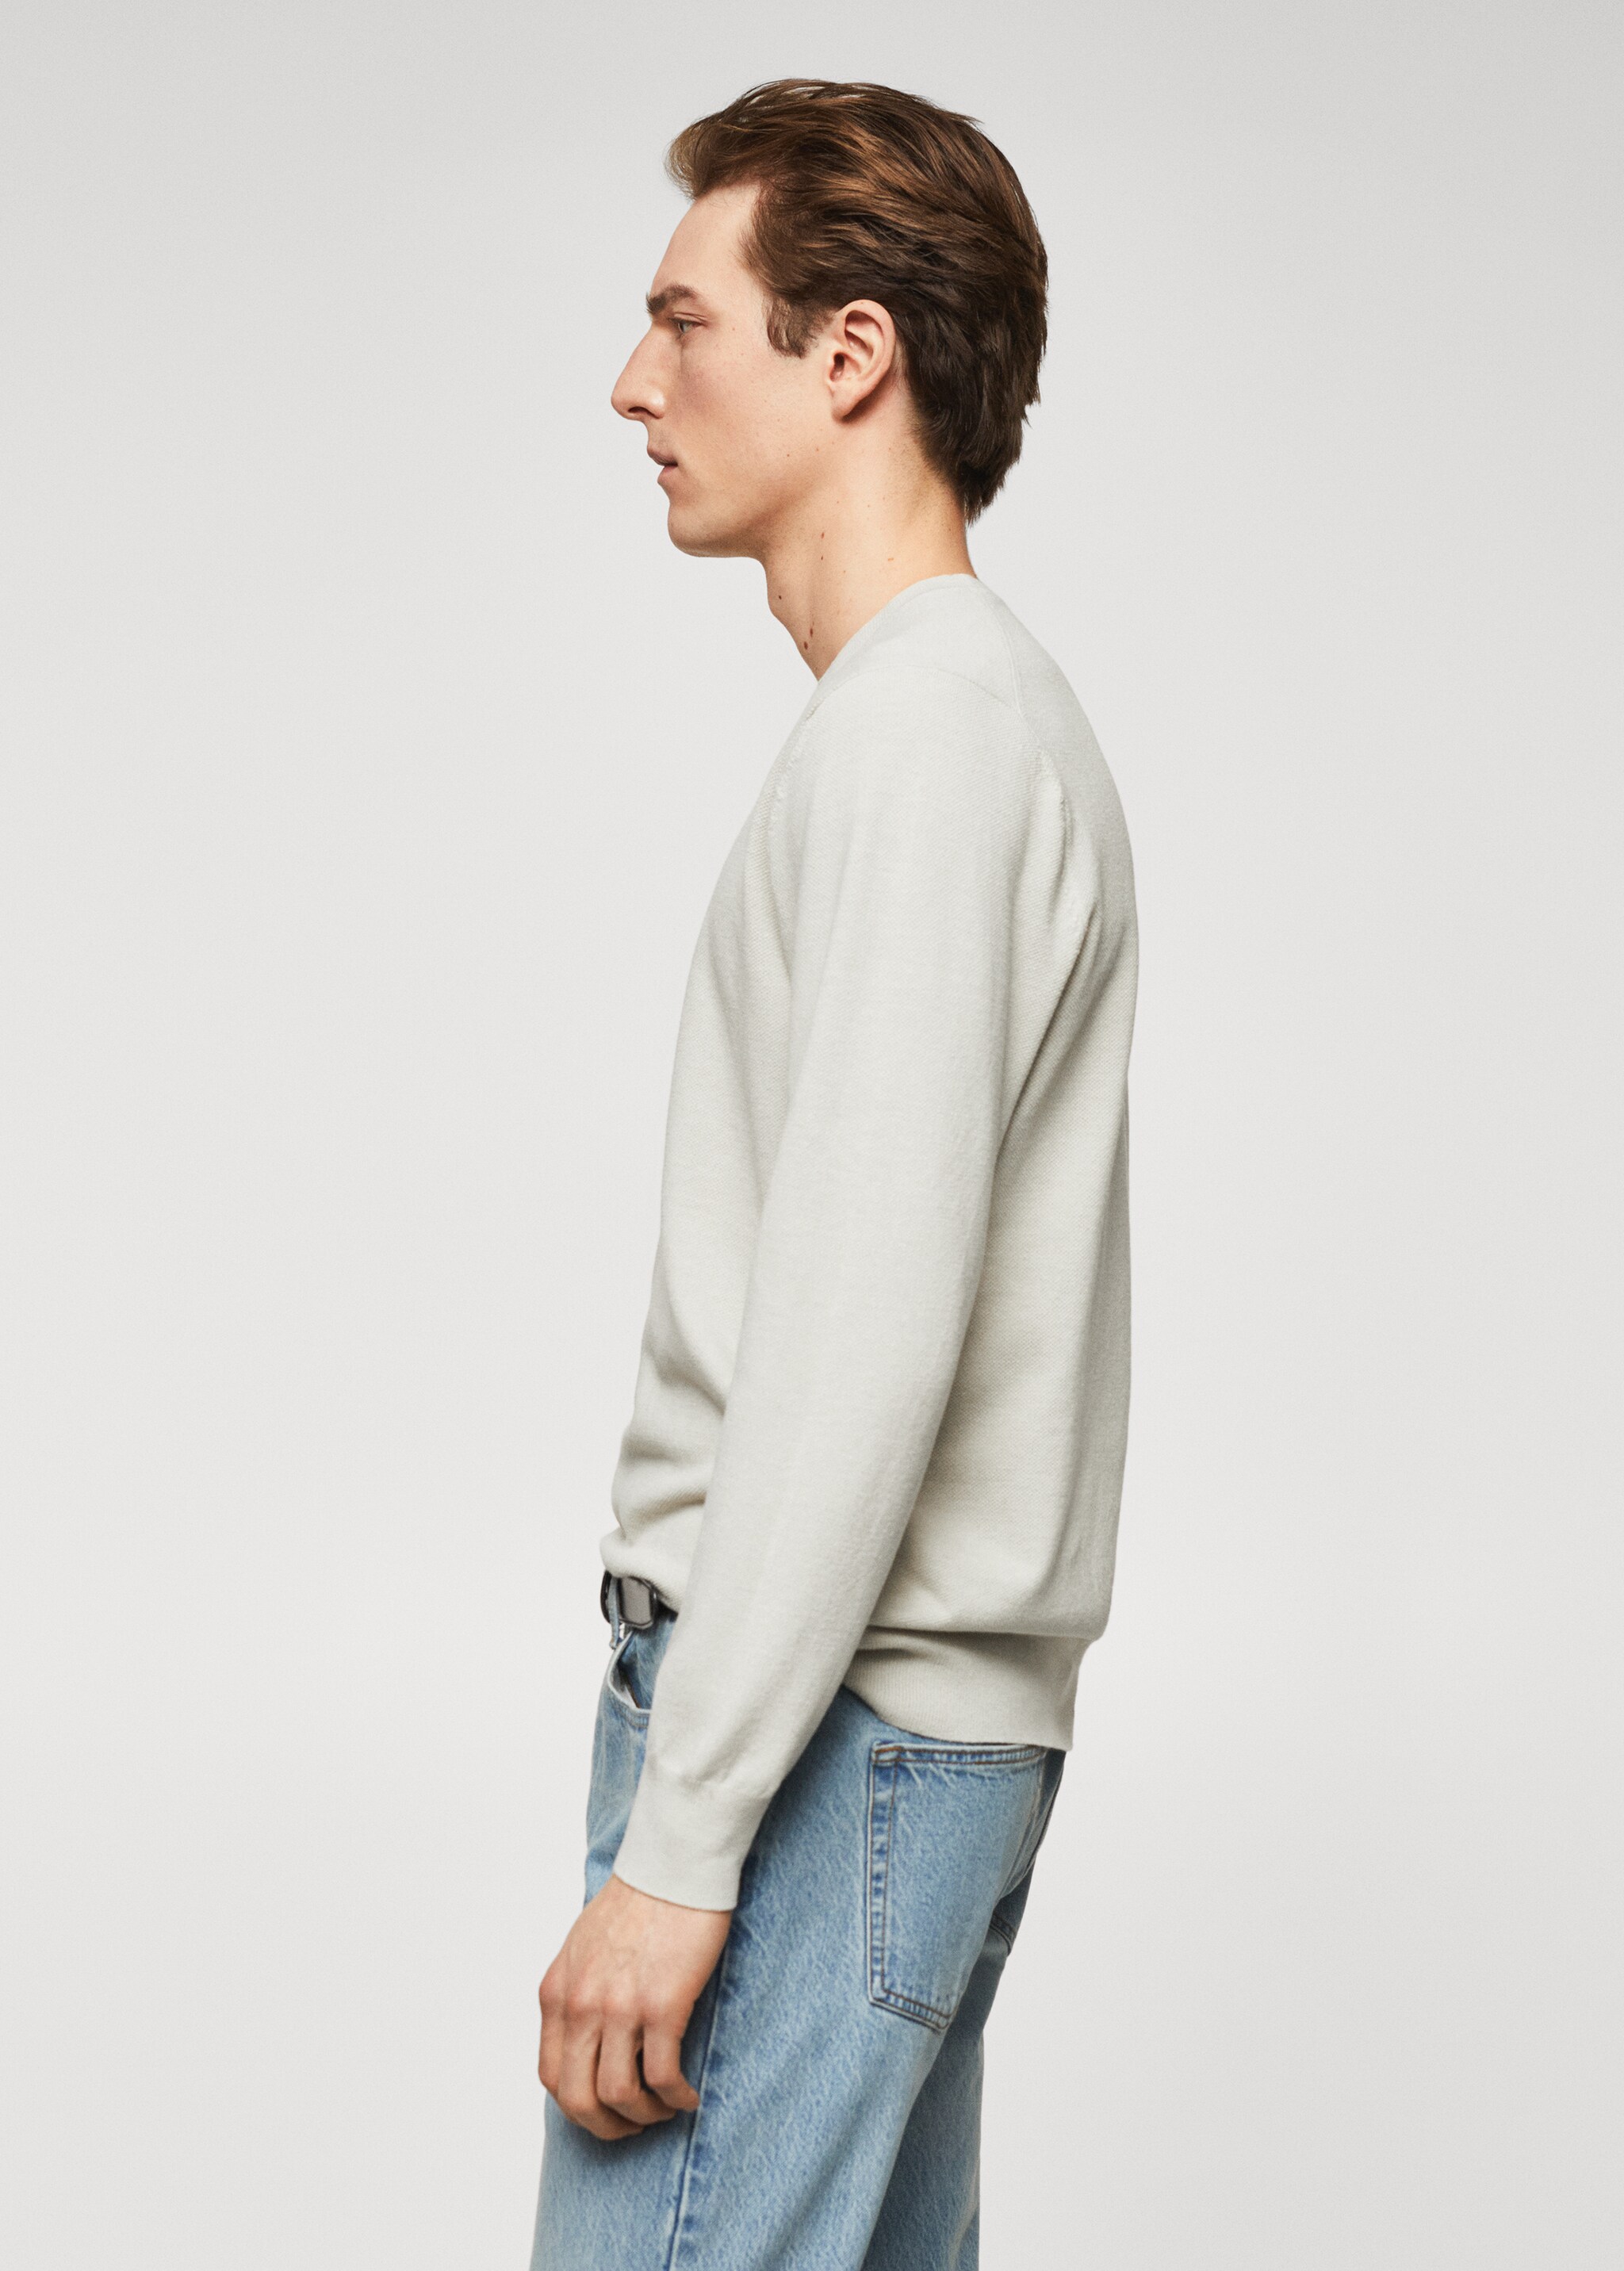 Fine-knit sweater - Details of the article 6